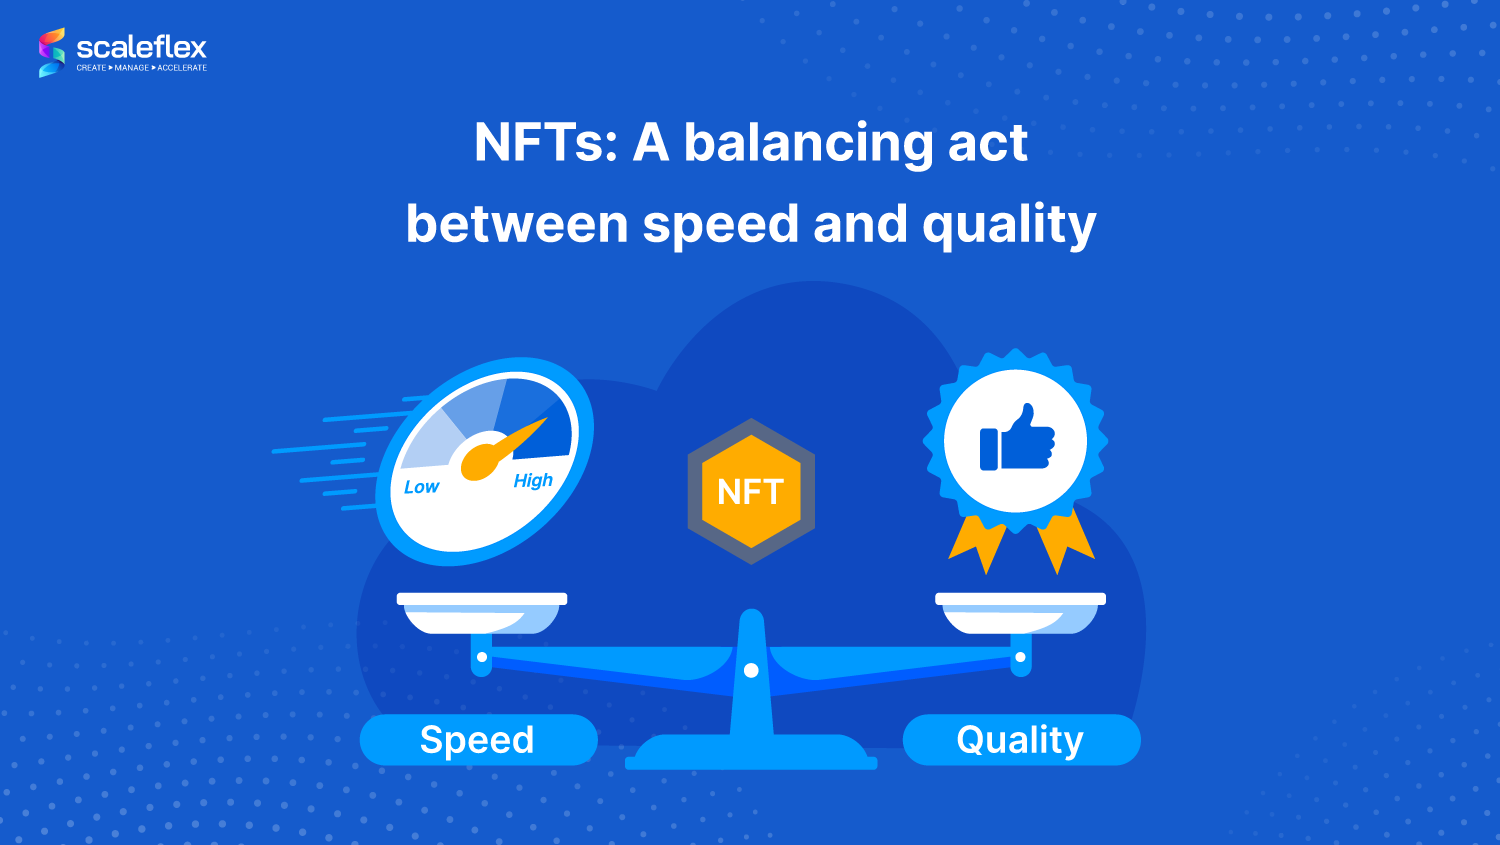 NFTs speed and quality challenge